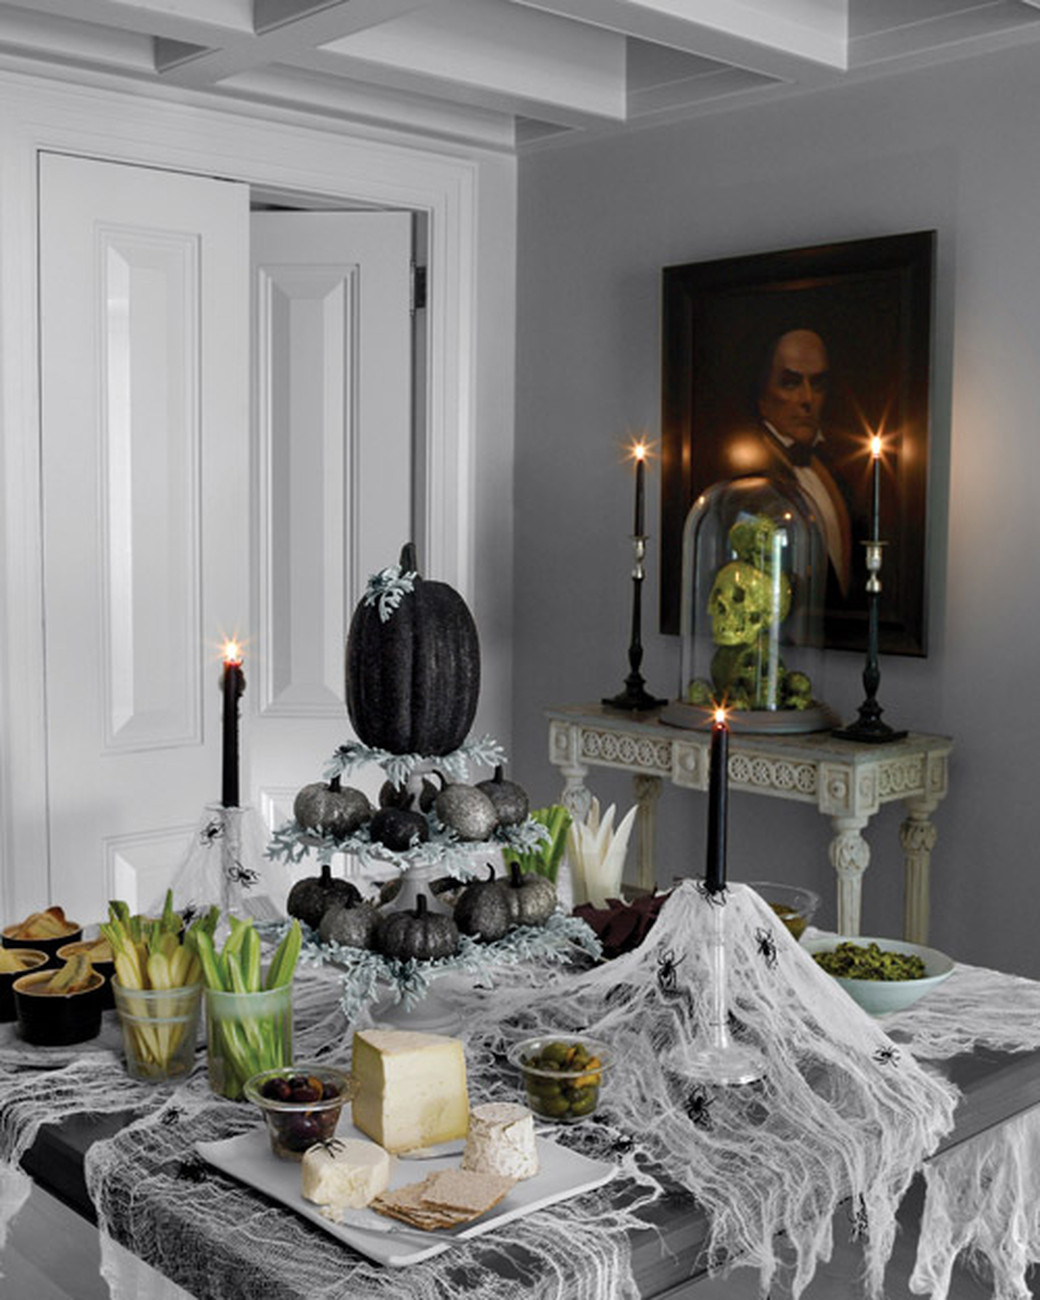 Halloween Table Decorations
 The Best Dining Tables Décor for Halloween